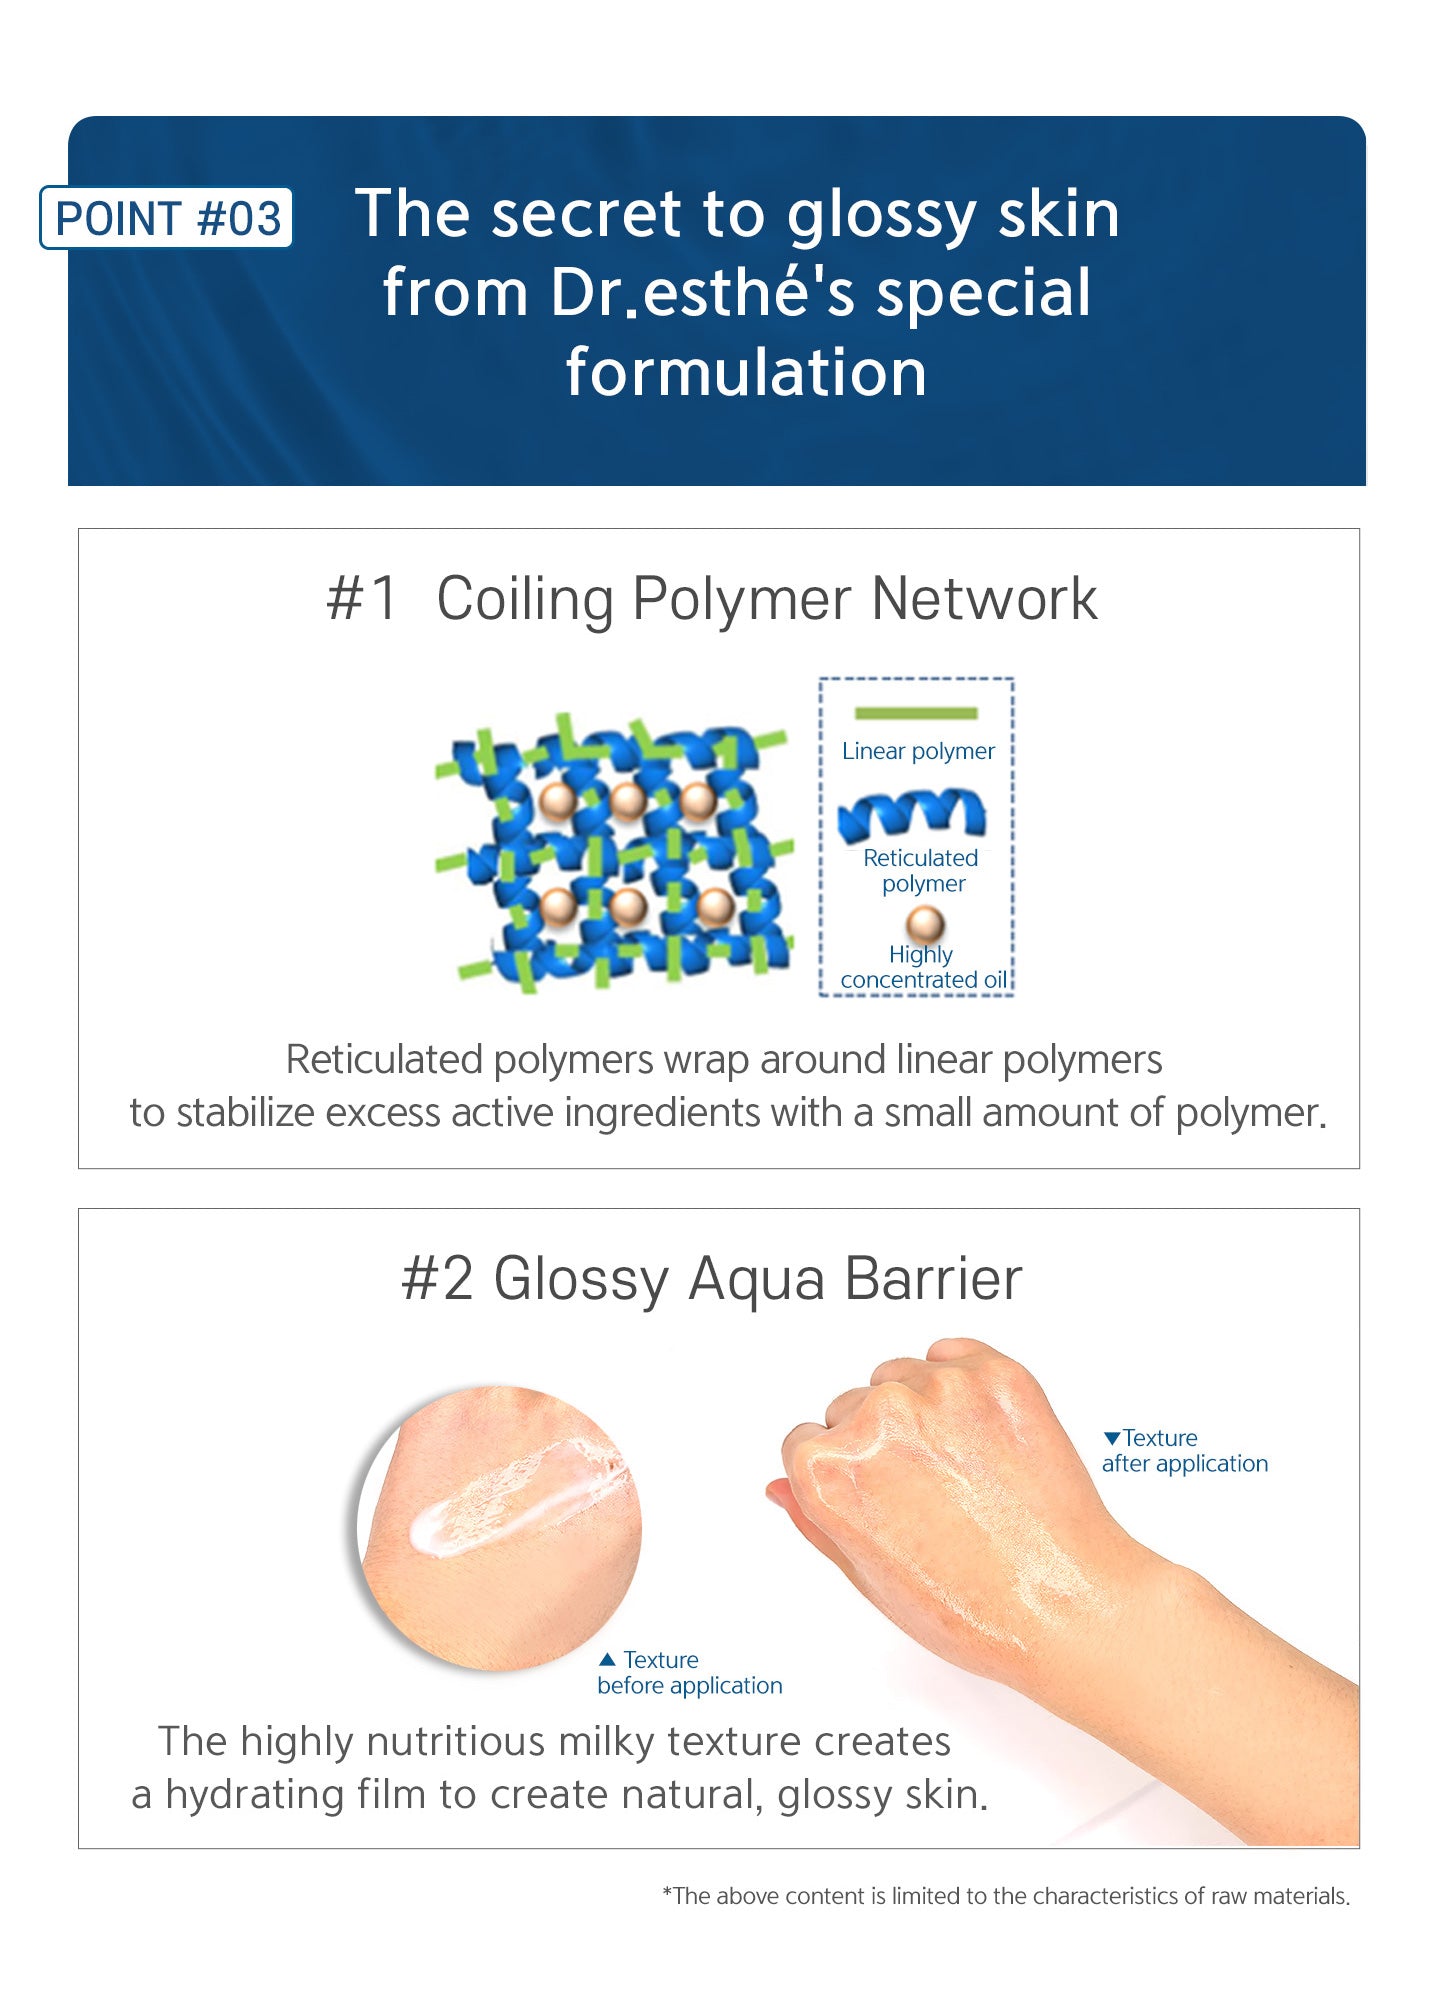 The secret to glossy skin from dr.esthe's special formulation: #1 cooling polymer network. Reticulated polymers wrap around linear polyme #2 glossy aqua barrier: The highly nutritious milky texture creates a hydrating films to create natural, glossy skin.